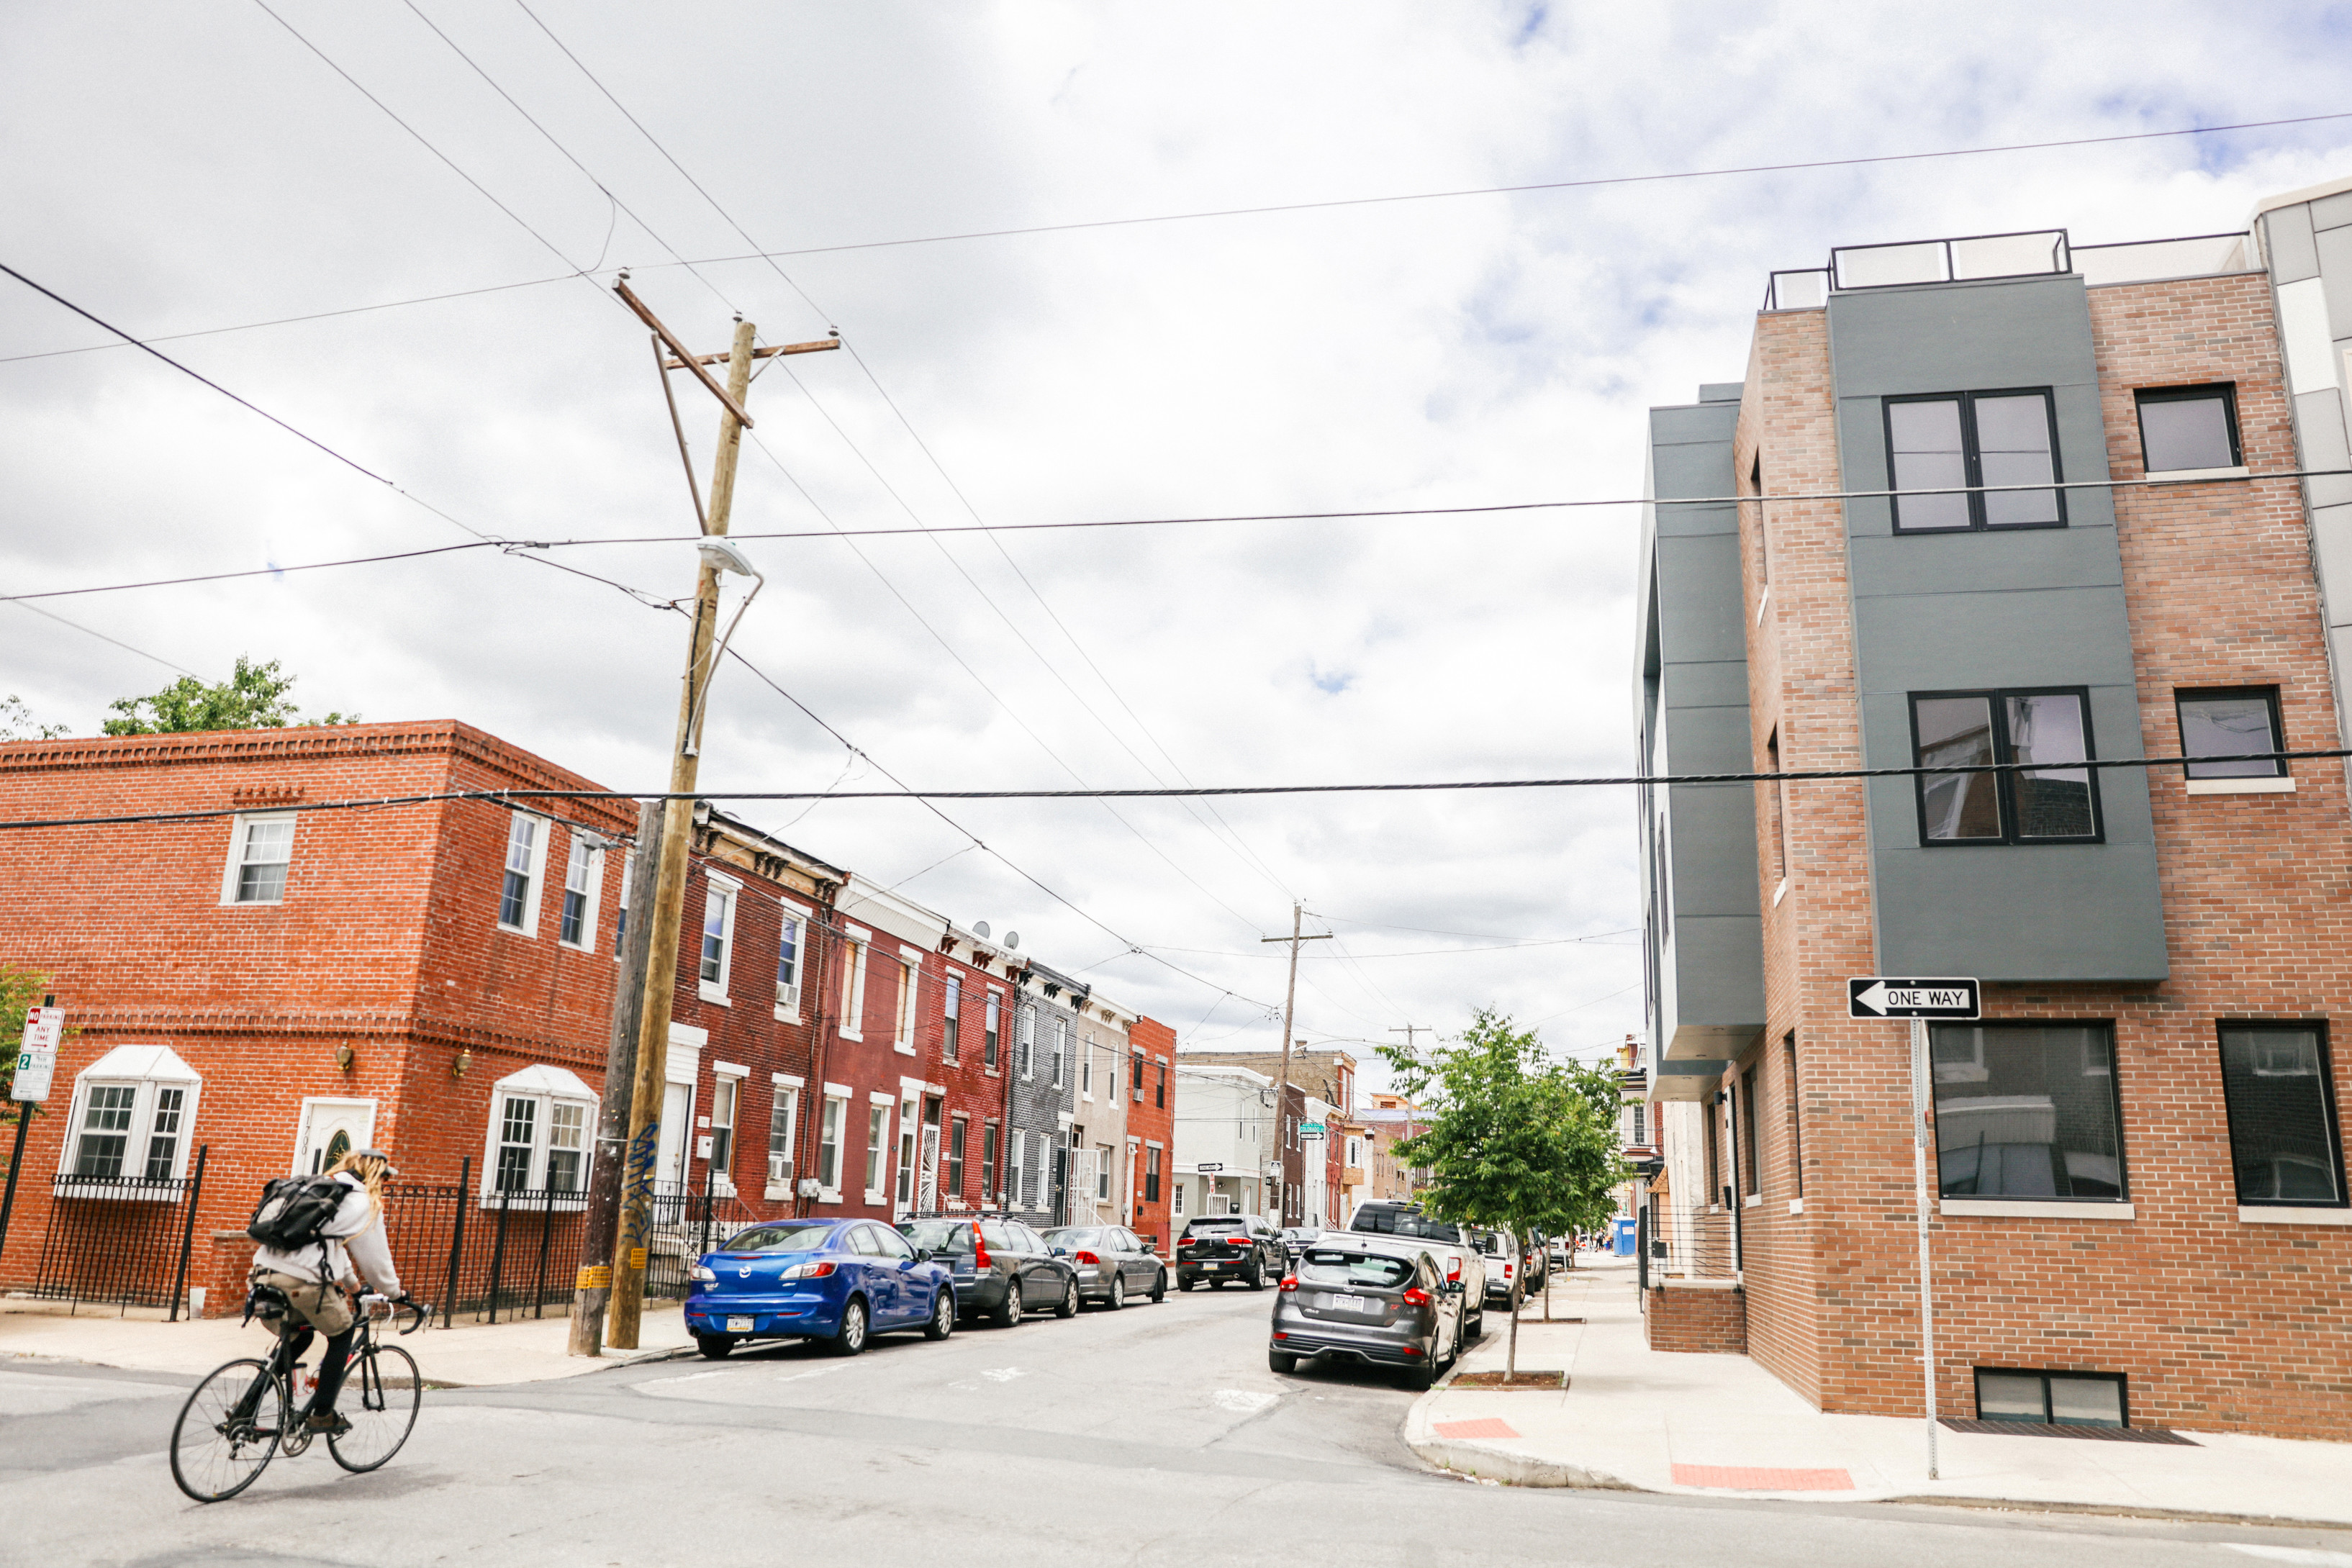 Point Breeze (Credit: Neal Santos/National Trust for Historic Preservation)